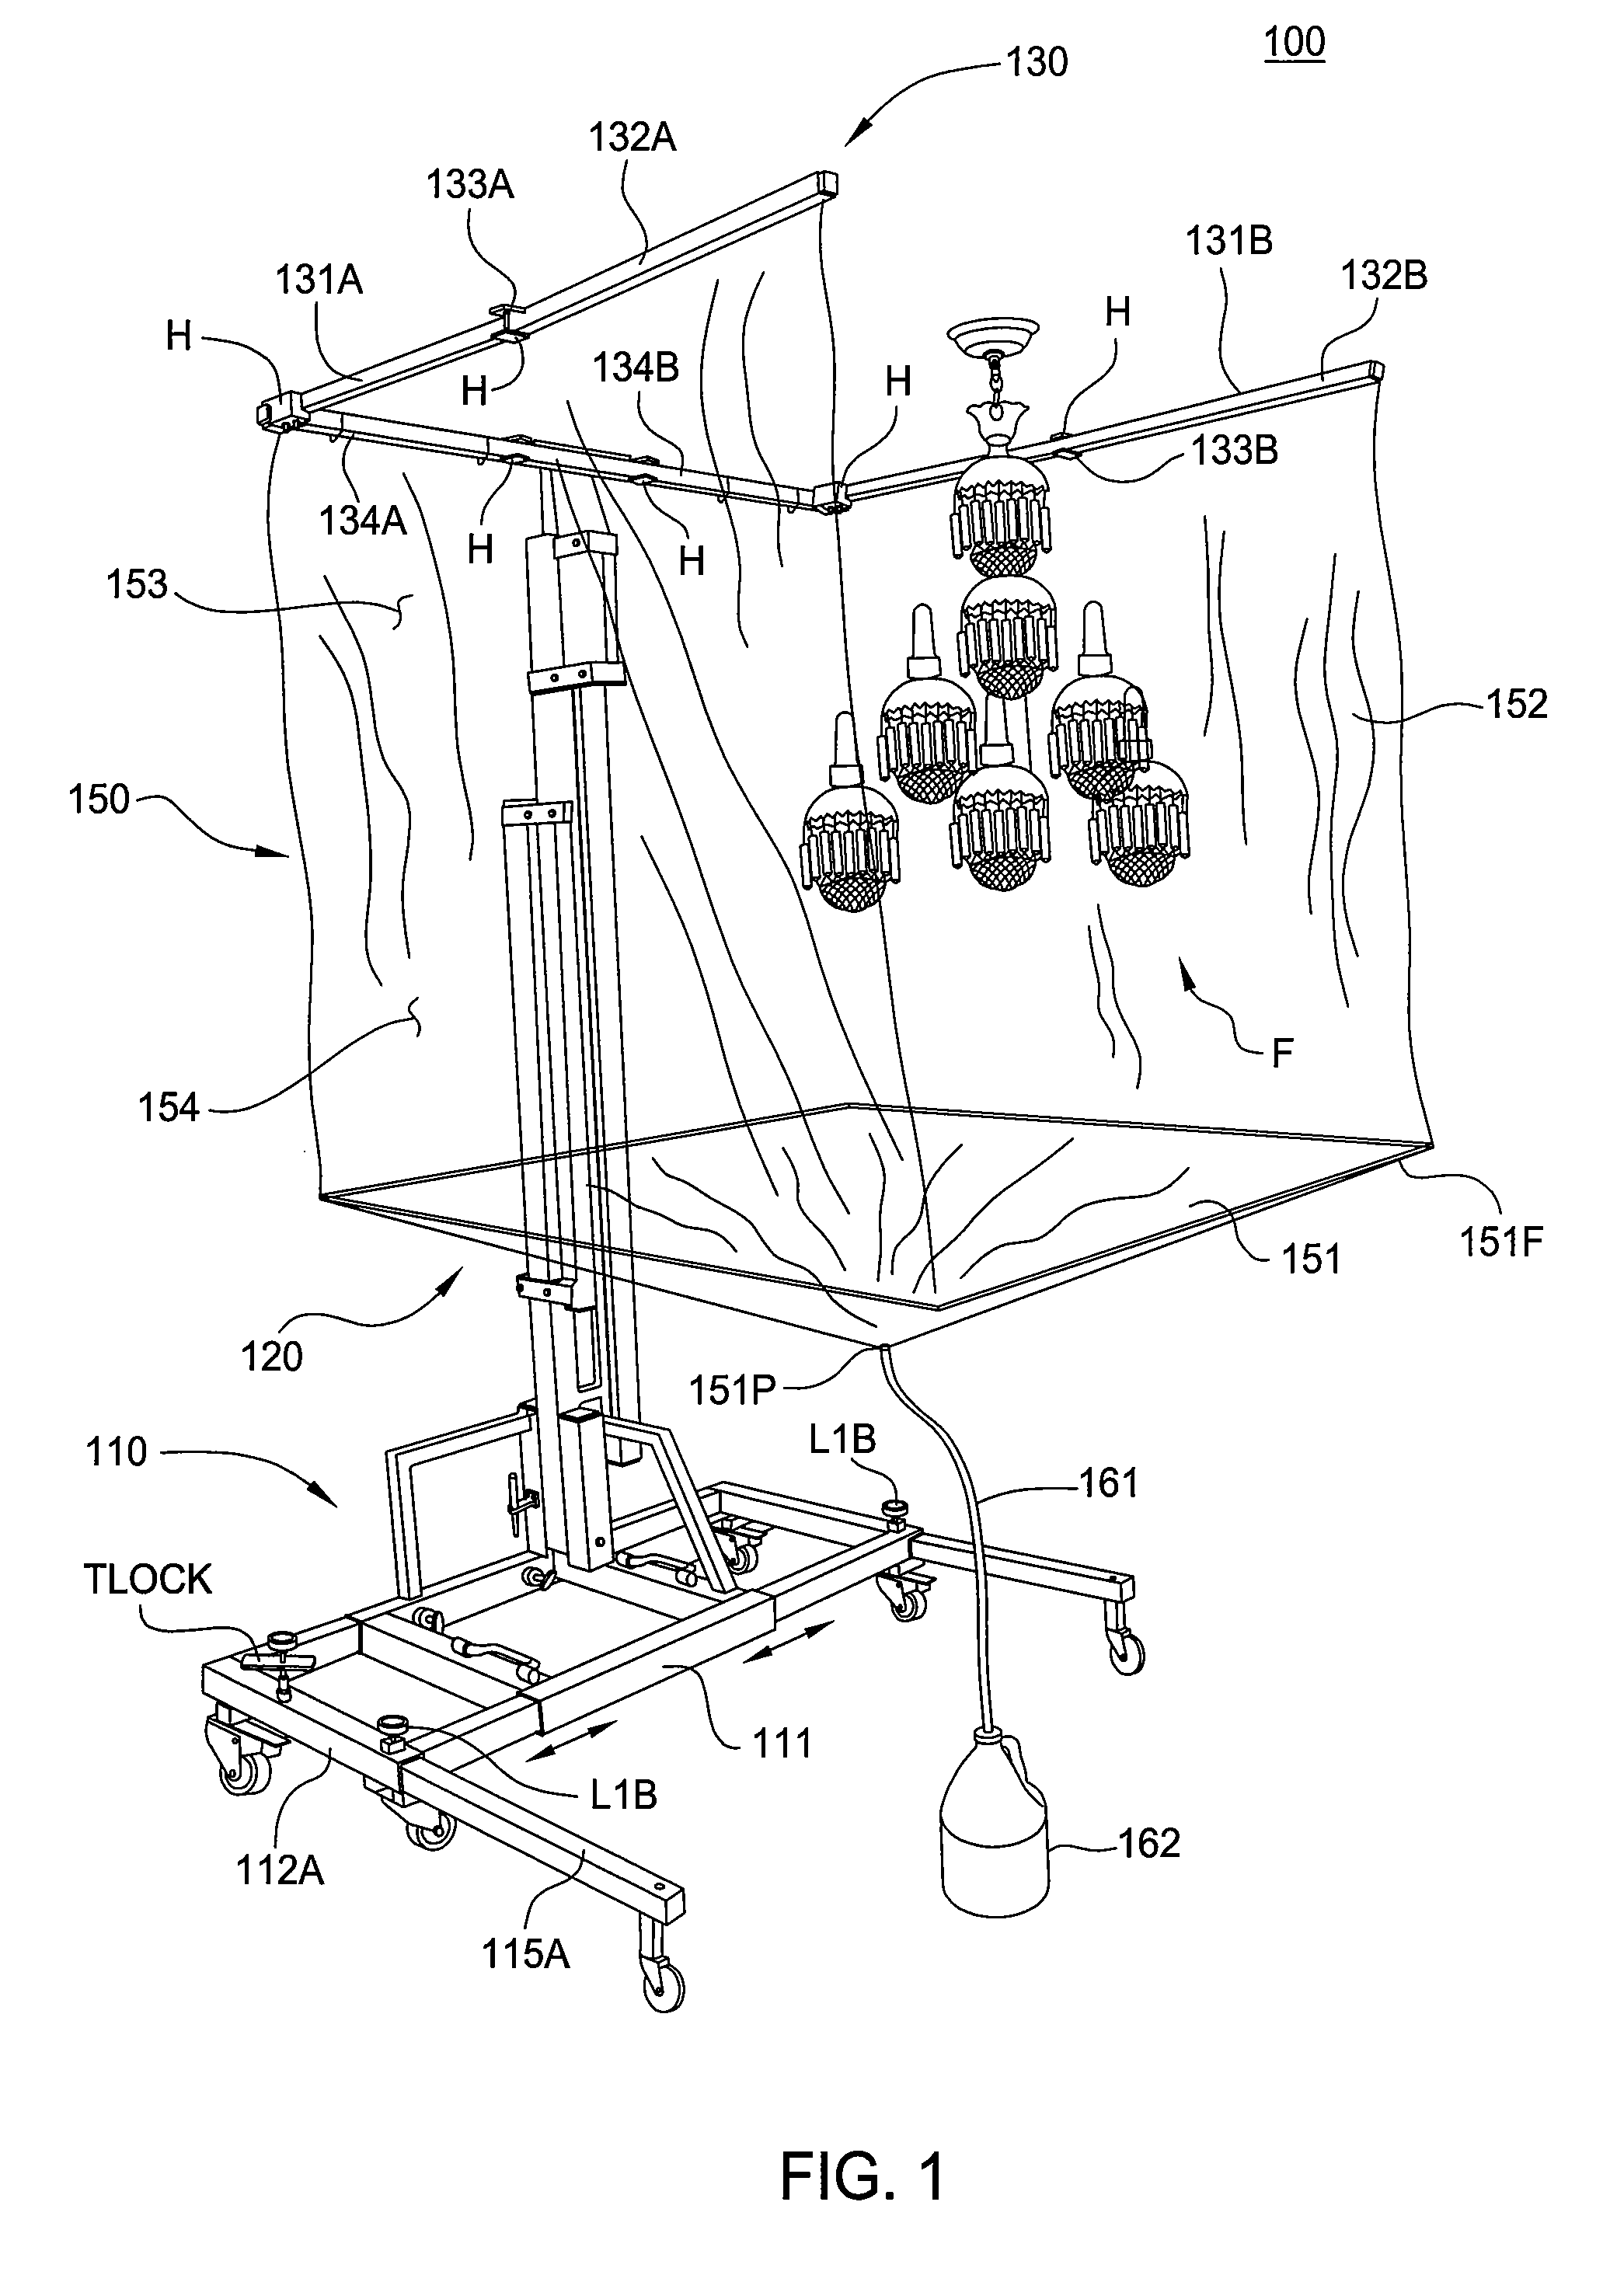 Apparatus for shielding an elevated fixture